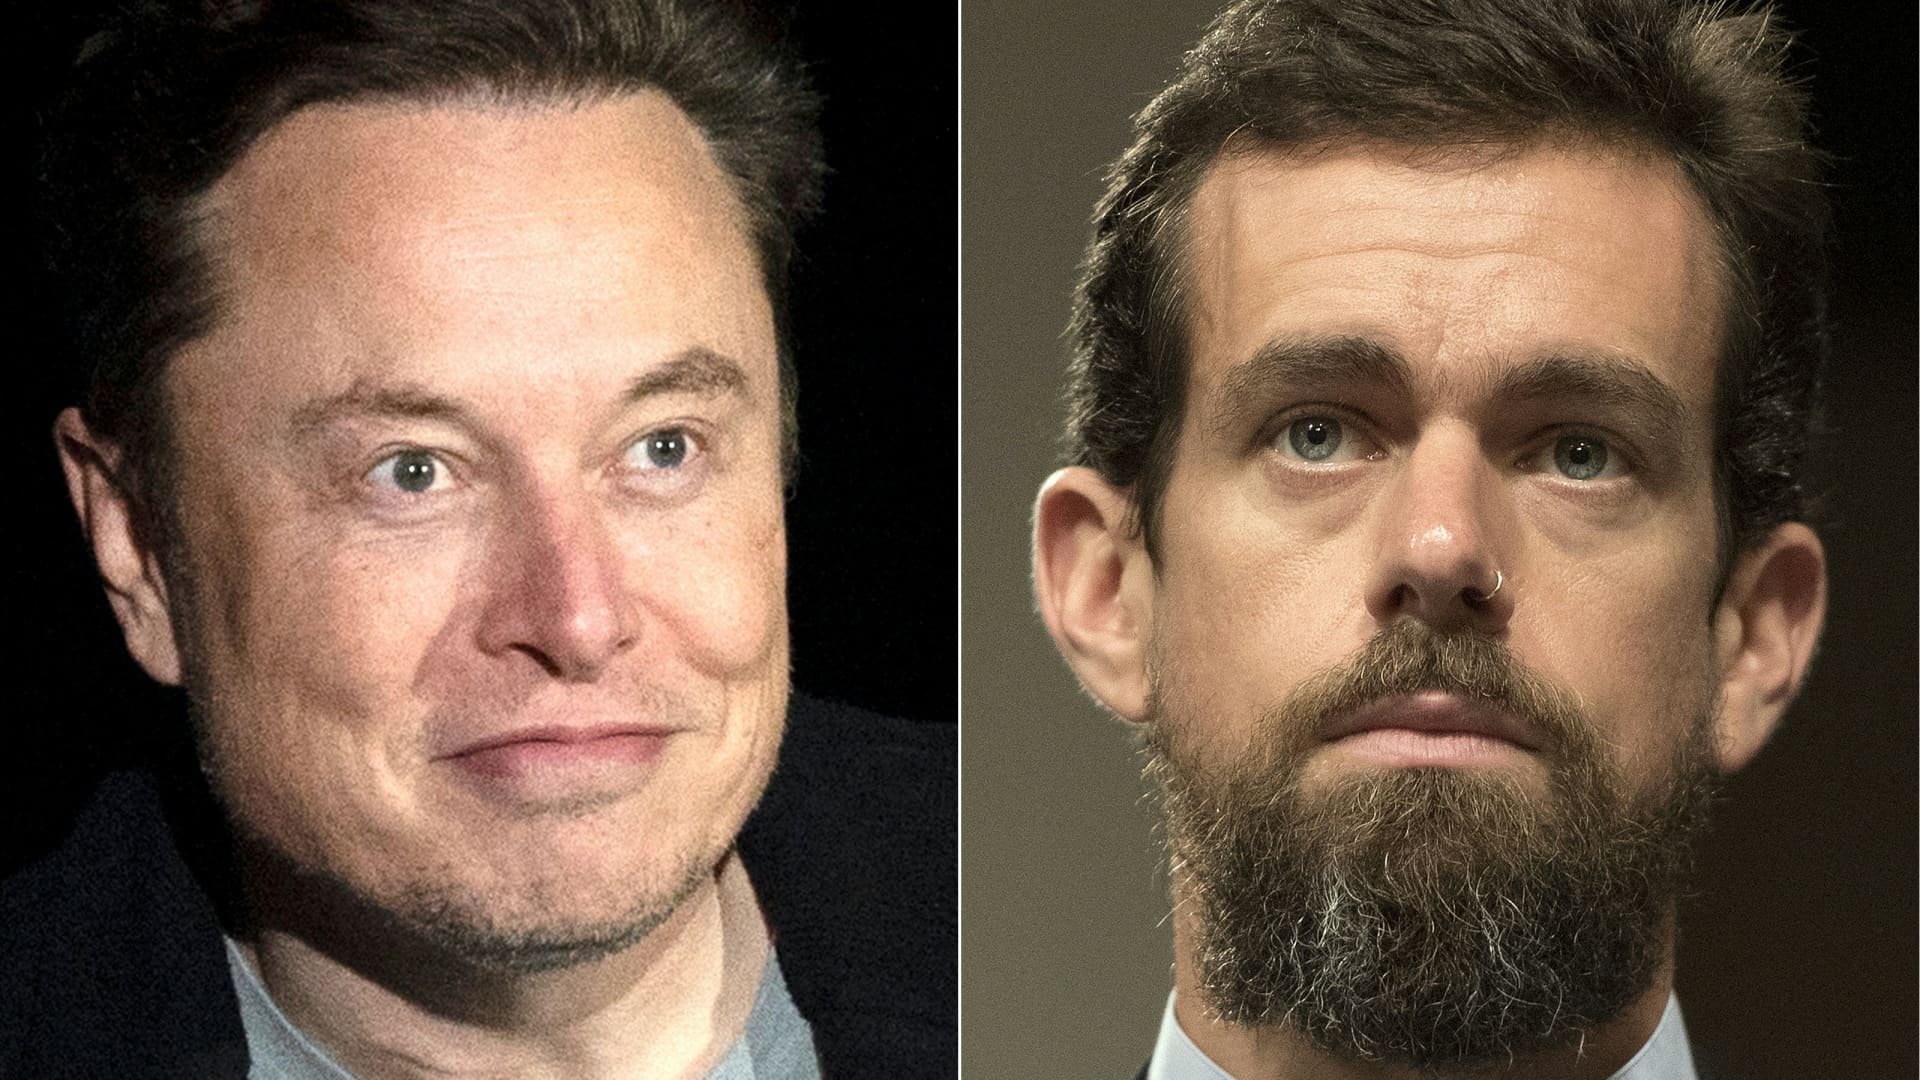 Jack Dorsey criticizes Elon Musk’s leadership at Twitter: ‘It all went south’